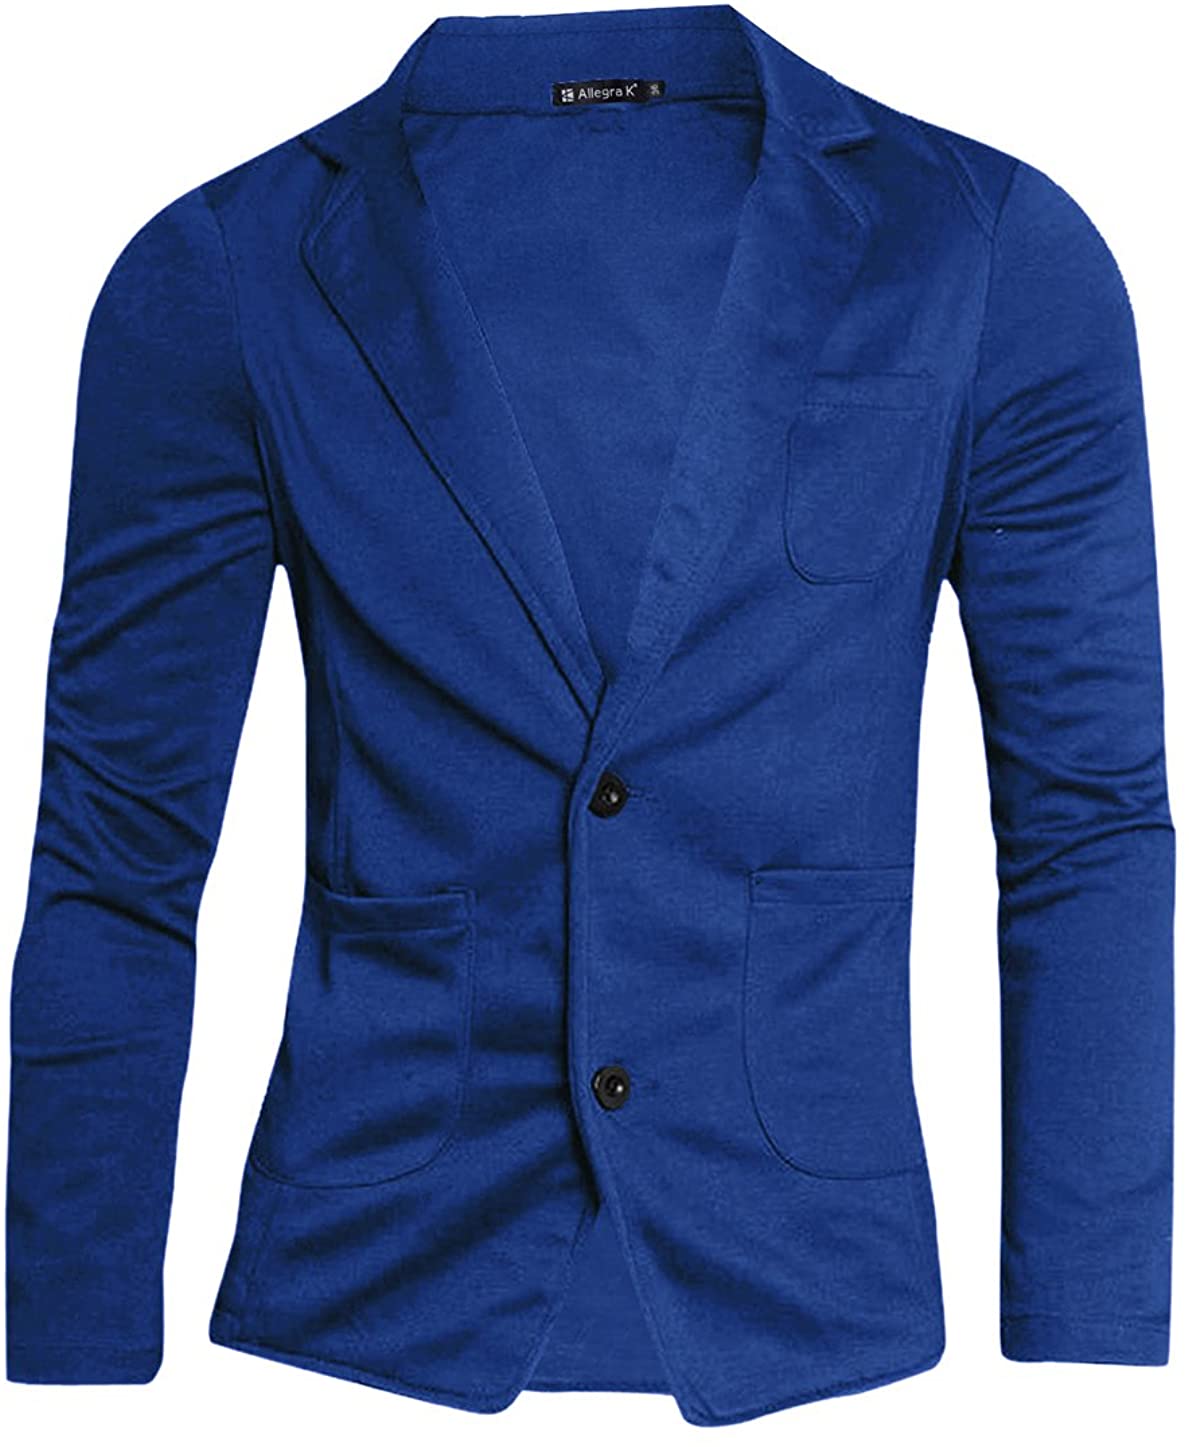 Uxcell Men's Casual Sports Coat Slim Fit Lightweight Button Cardigan Knit Blazer with Pockets